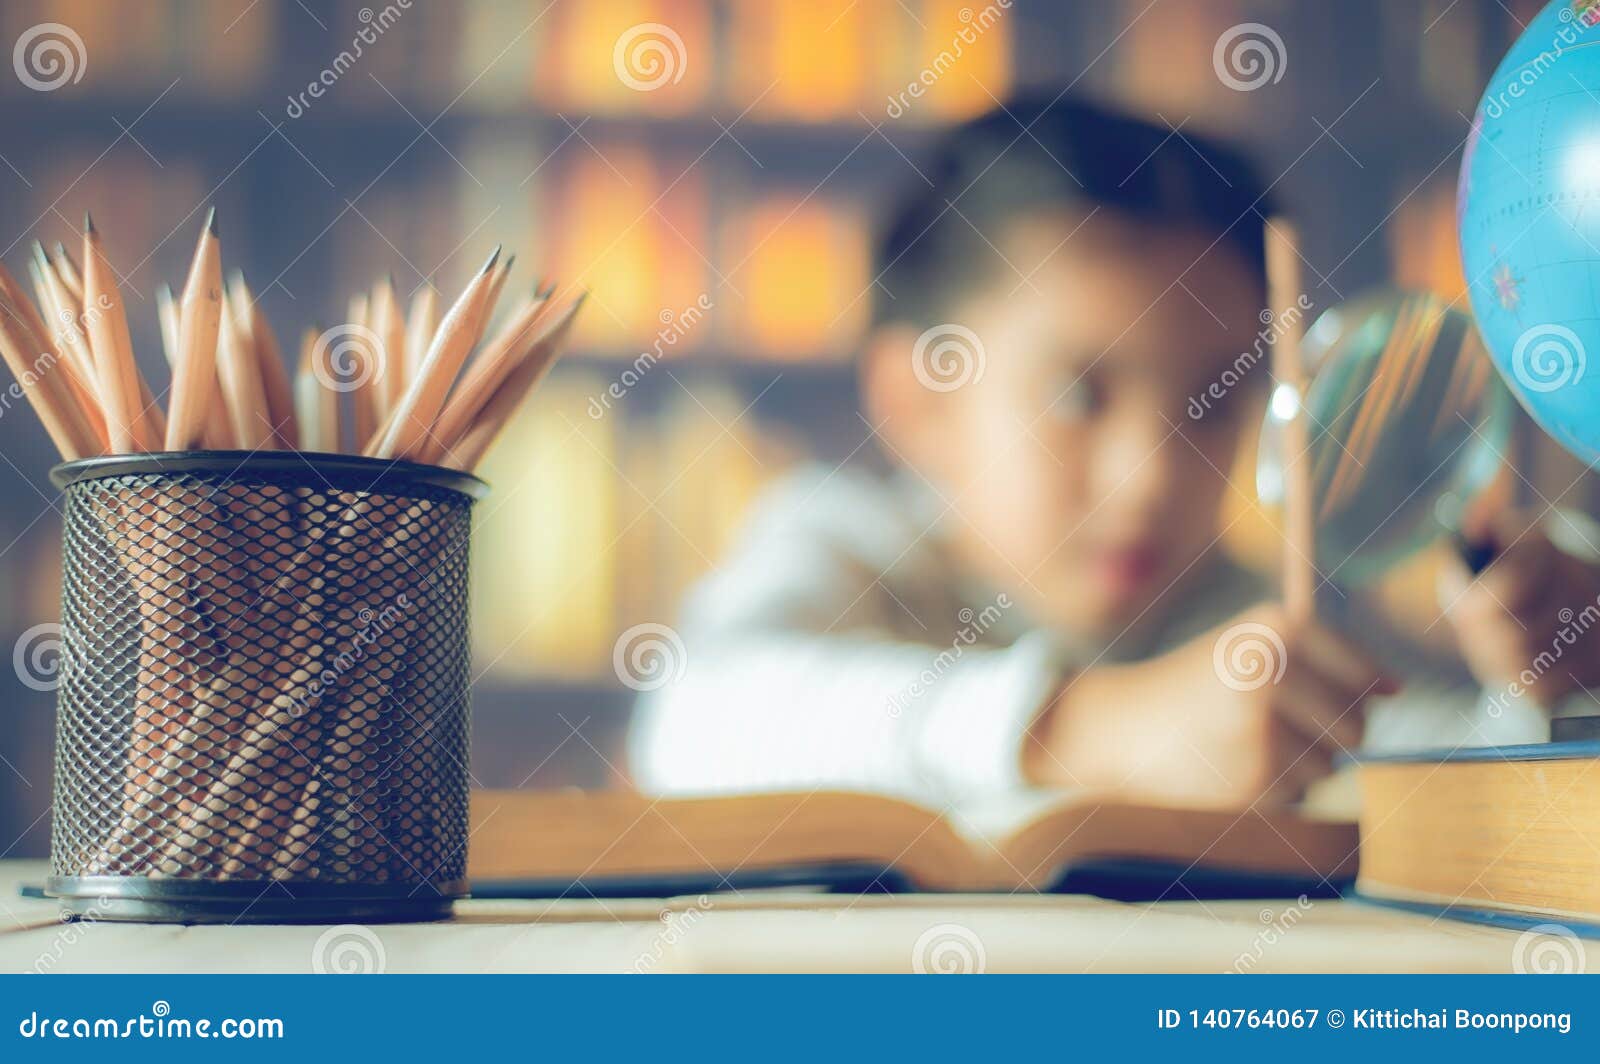 pencils on a wooden table and asian child industrious is sitting at a desk . background. educational background